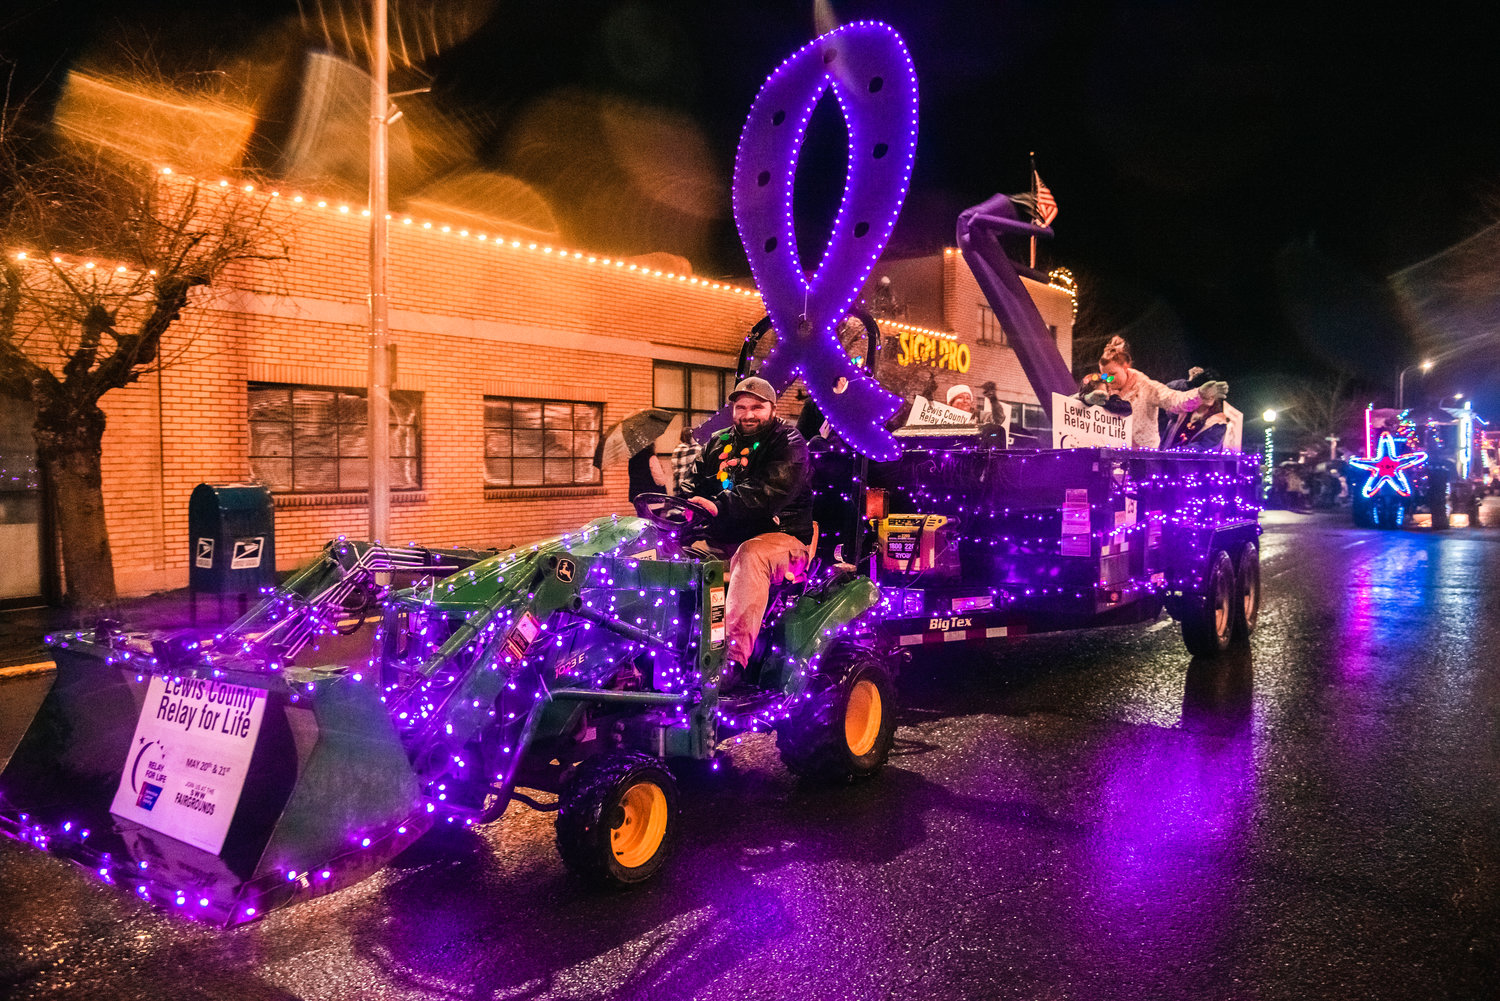 Purple lights illuminate the Lewis County Relay for Life float during the Lighted Tractor Parade in Centralia Saturday night.